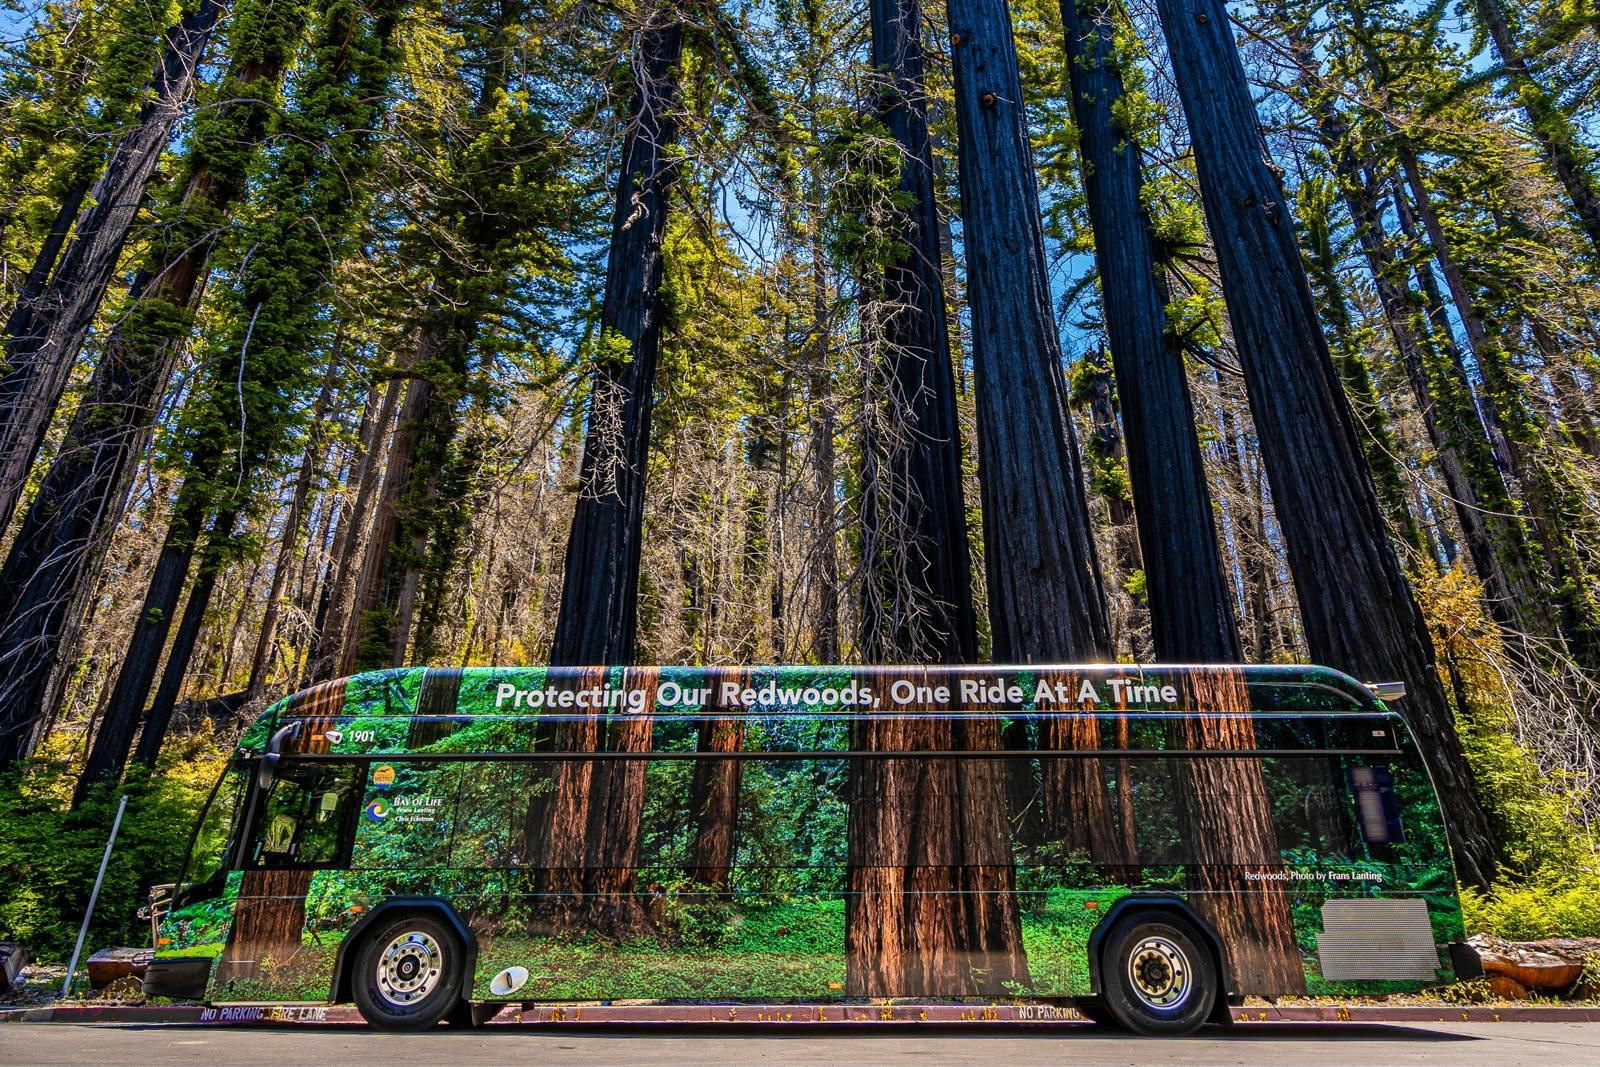 A Santa Cruz Metro bus with redwoods pictured on the side and in back of the vehicle